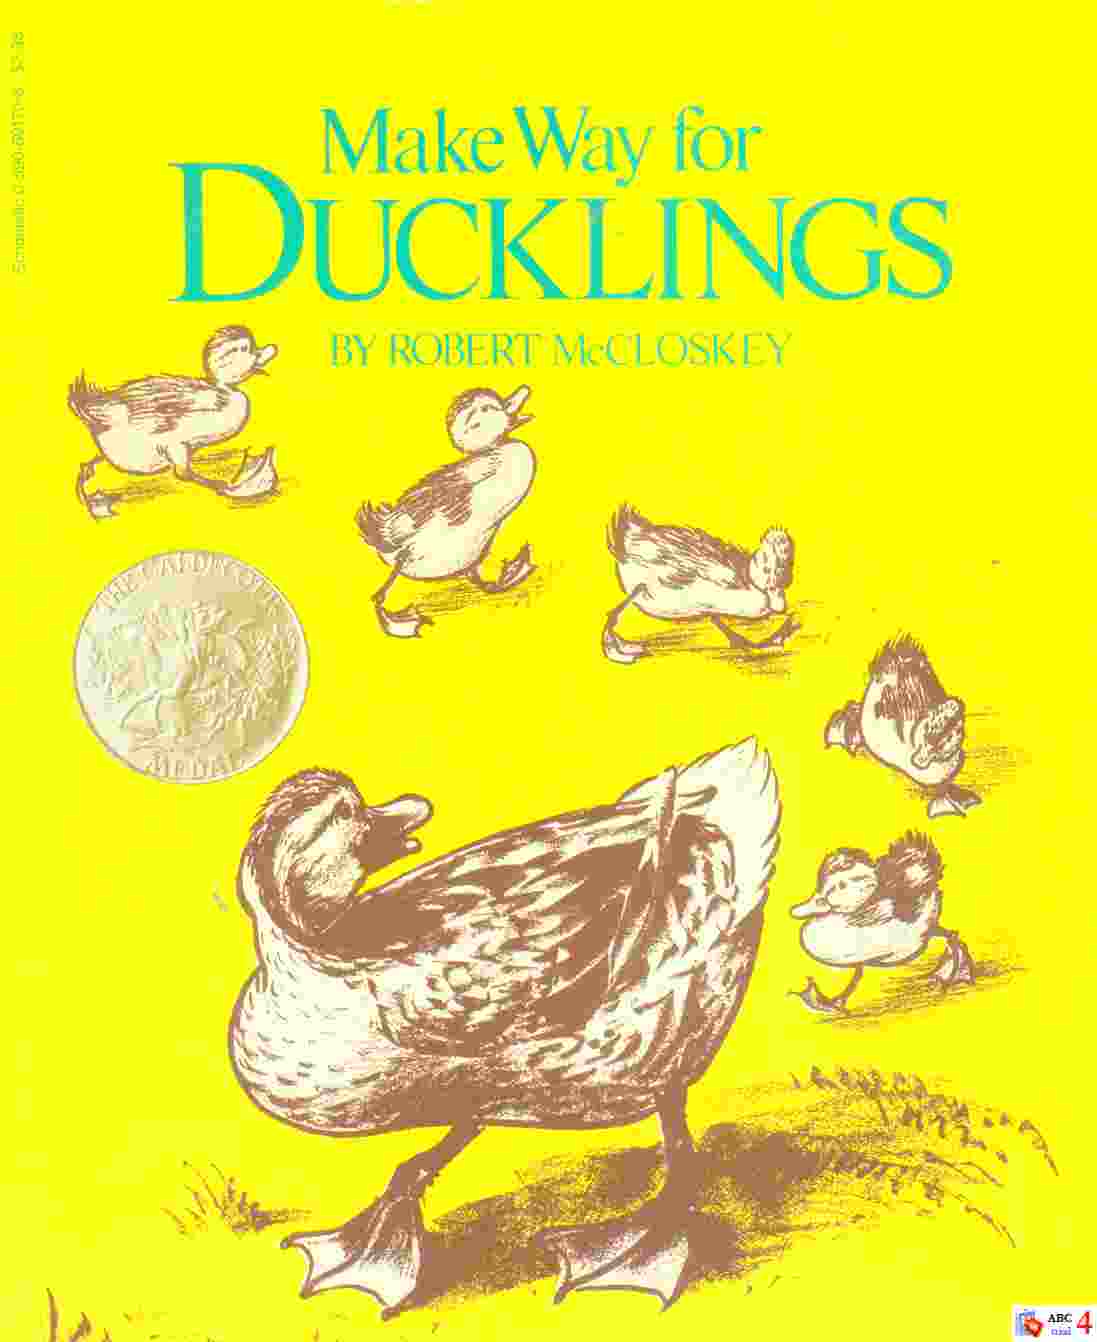 Make way for ducklings 封面